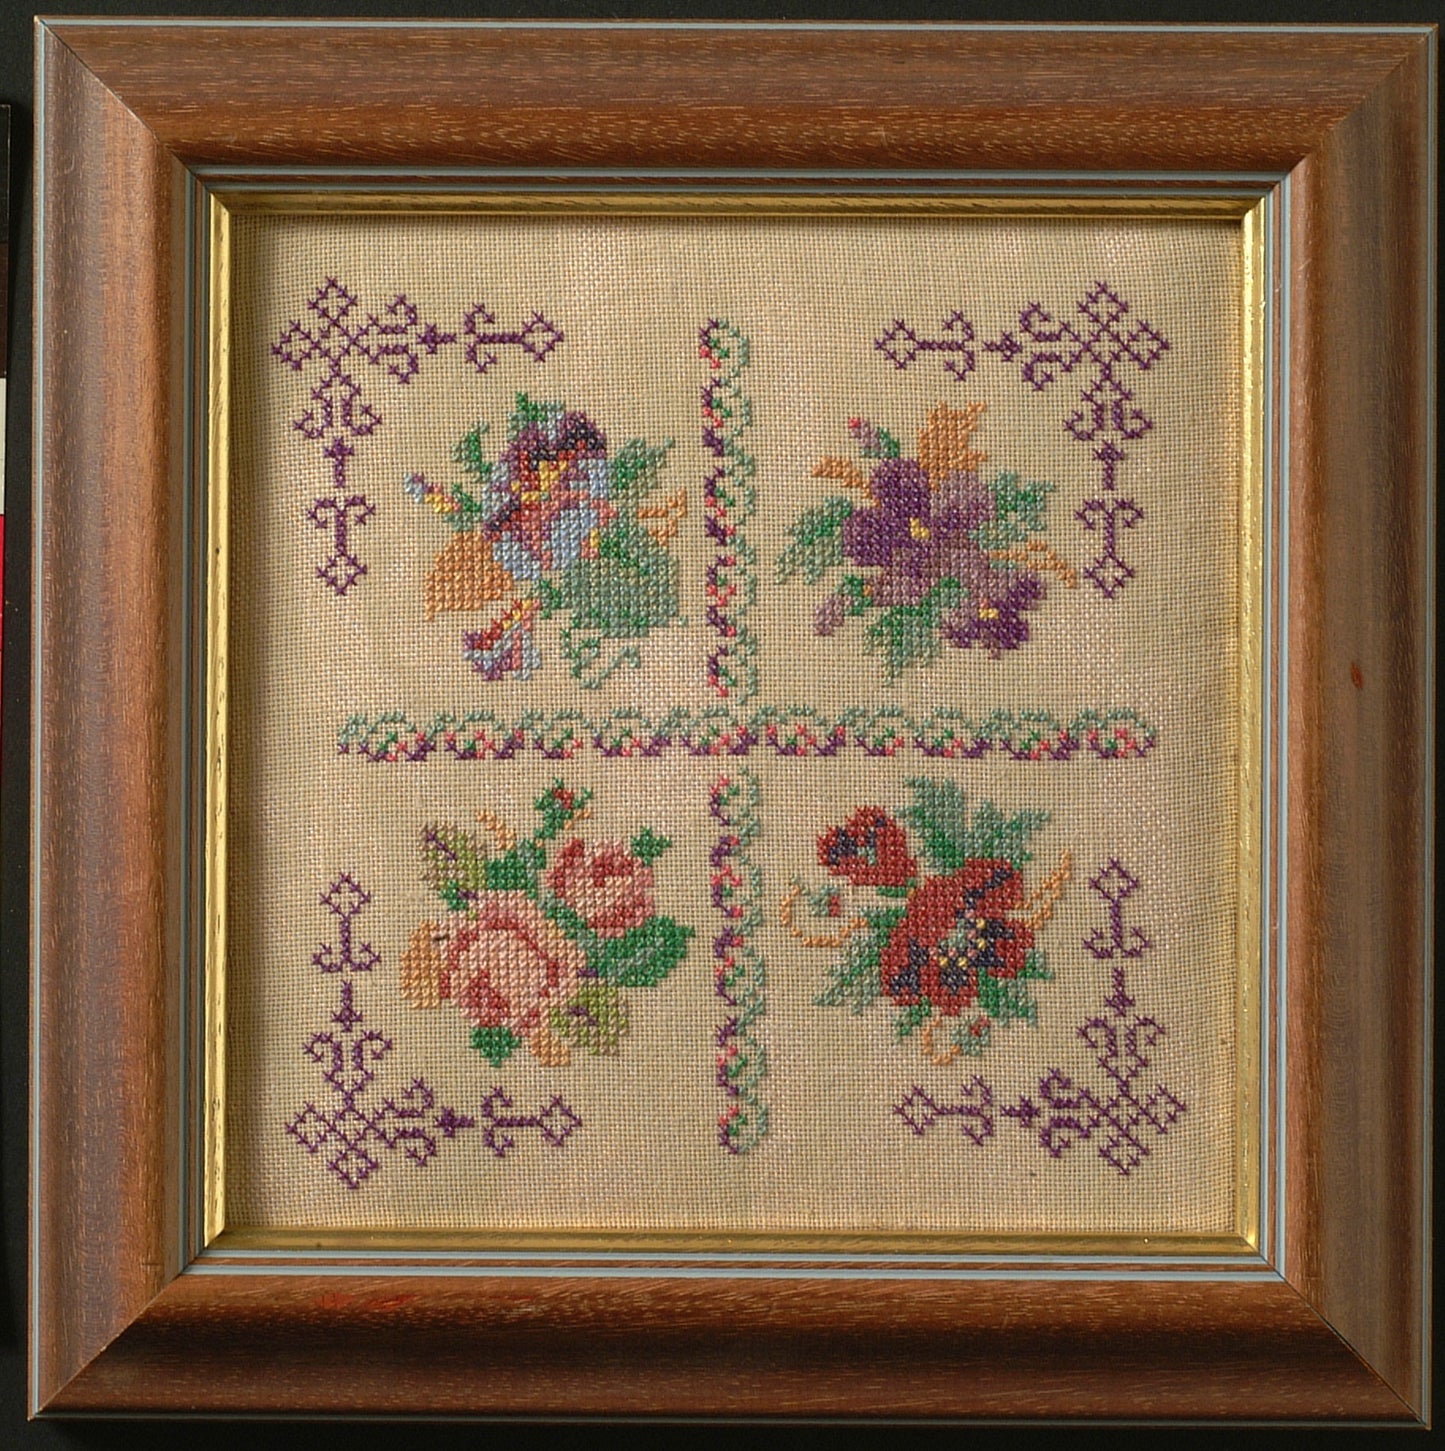 The Cross Stitch Guild Design and Pattern Book, by Jane Greenoff and Sue Hawkins